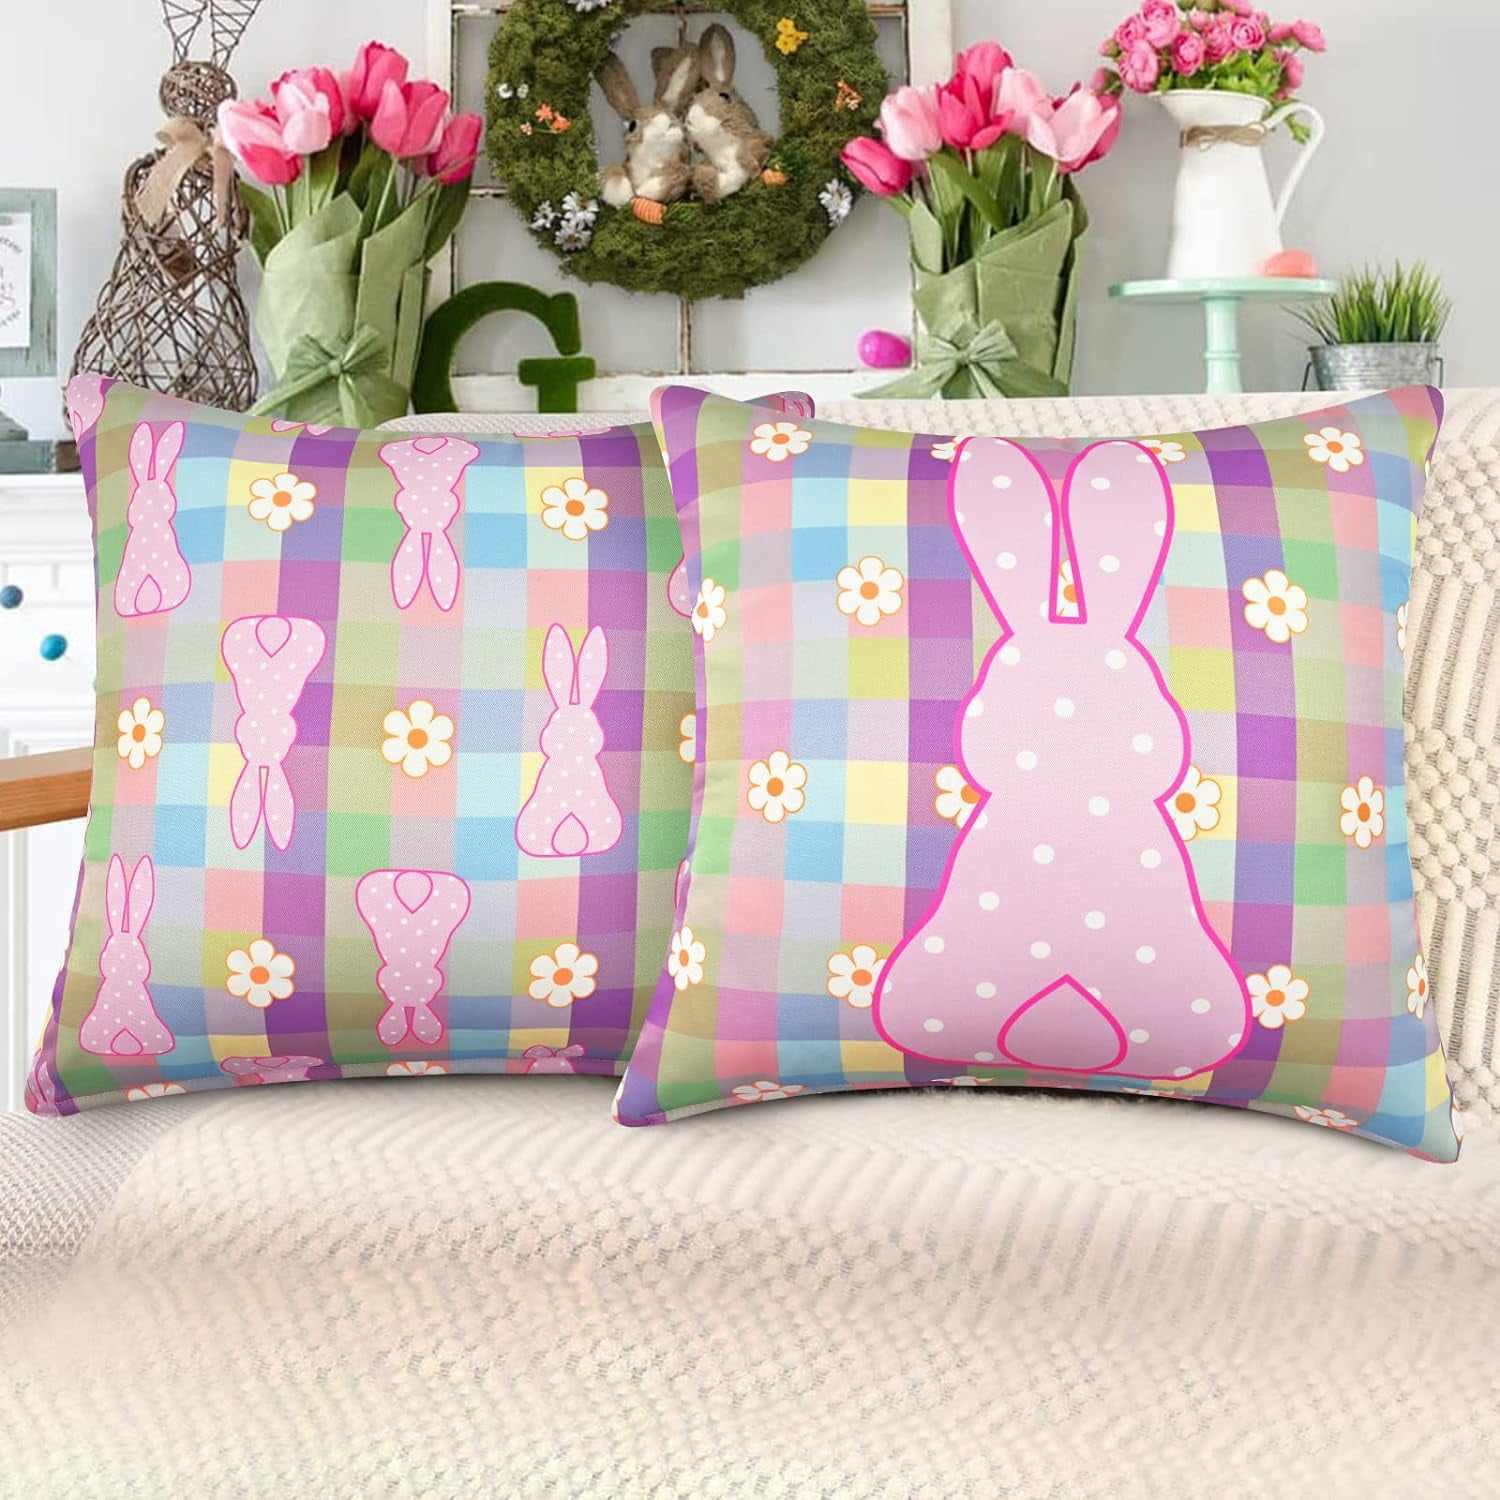 Spring - Two-Sided Floral Cushion Covers, Set of 5